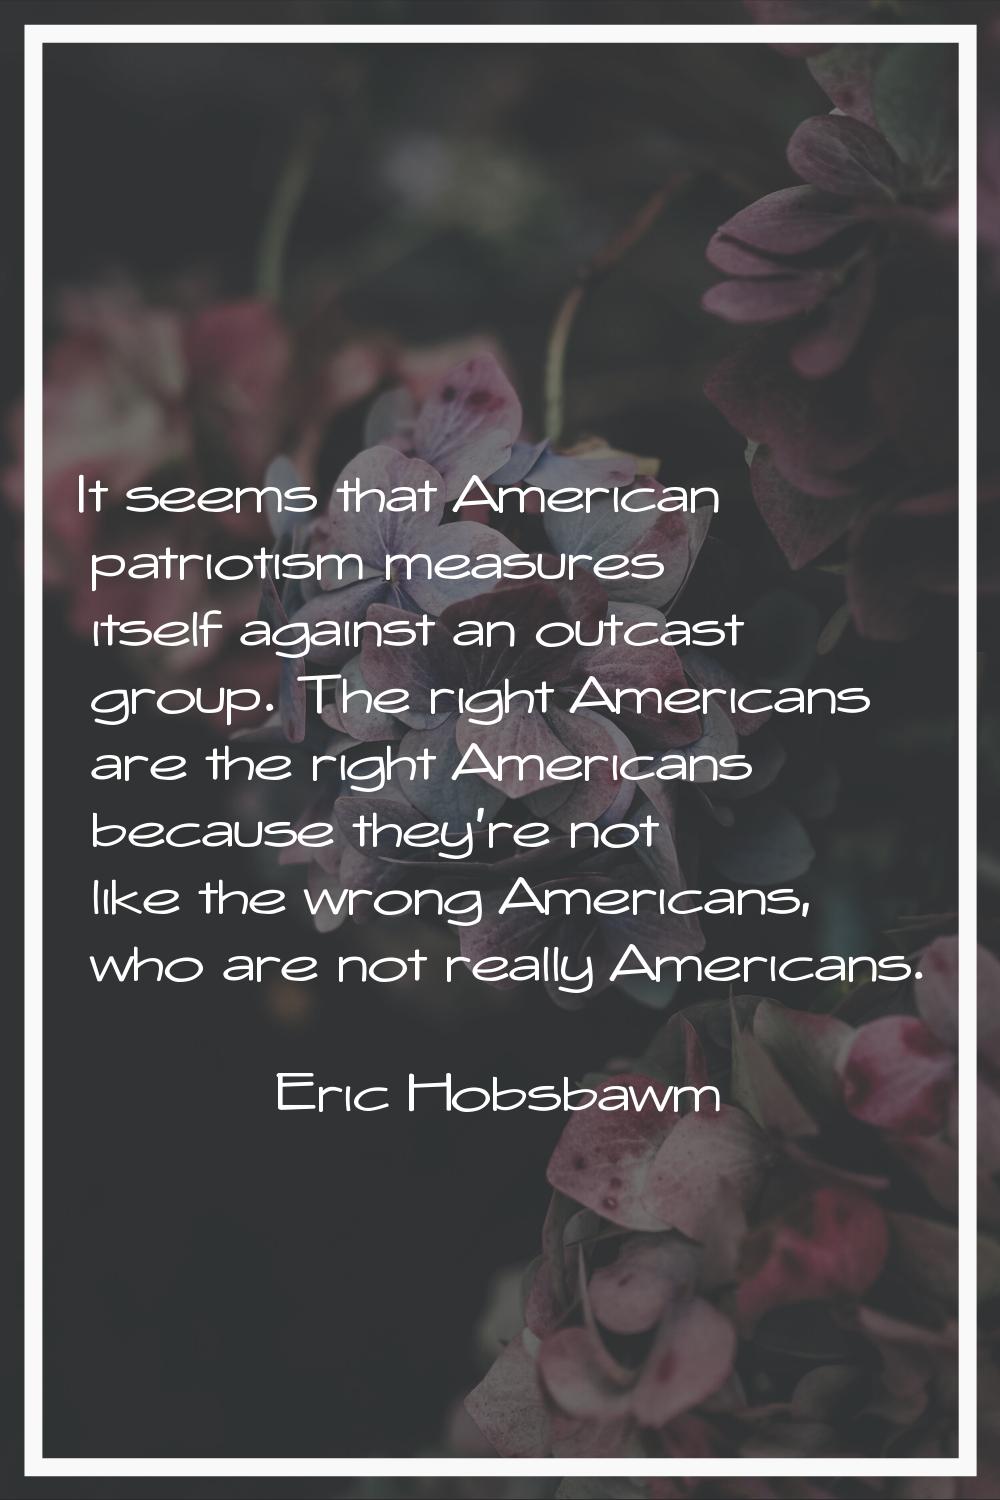 It seems that American patriotism measures itself against an outcast group. The right Americans are